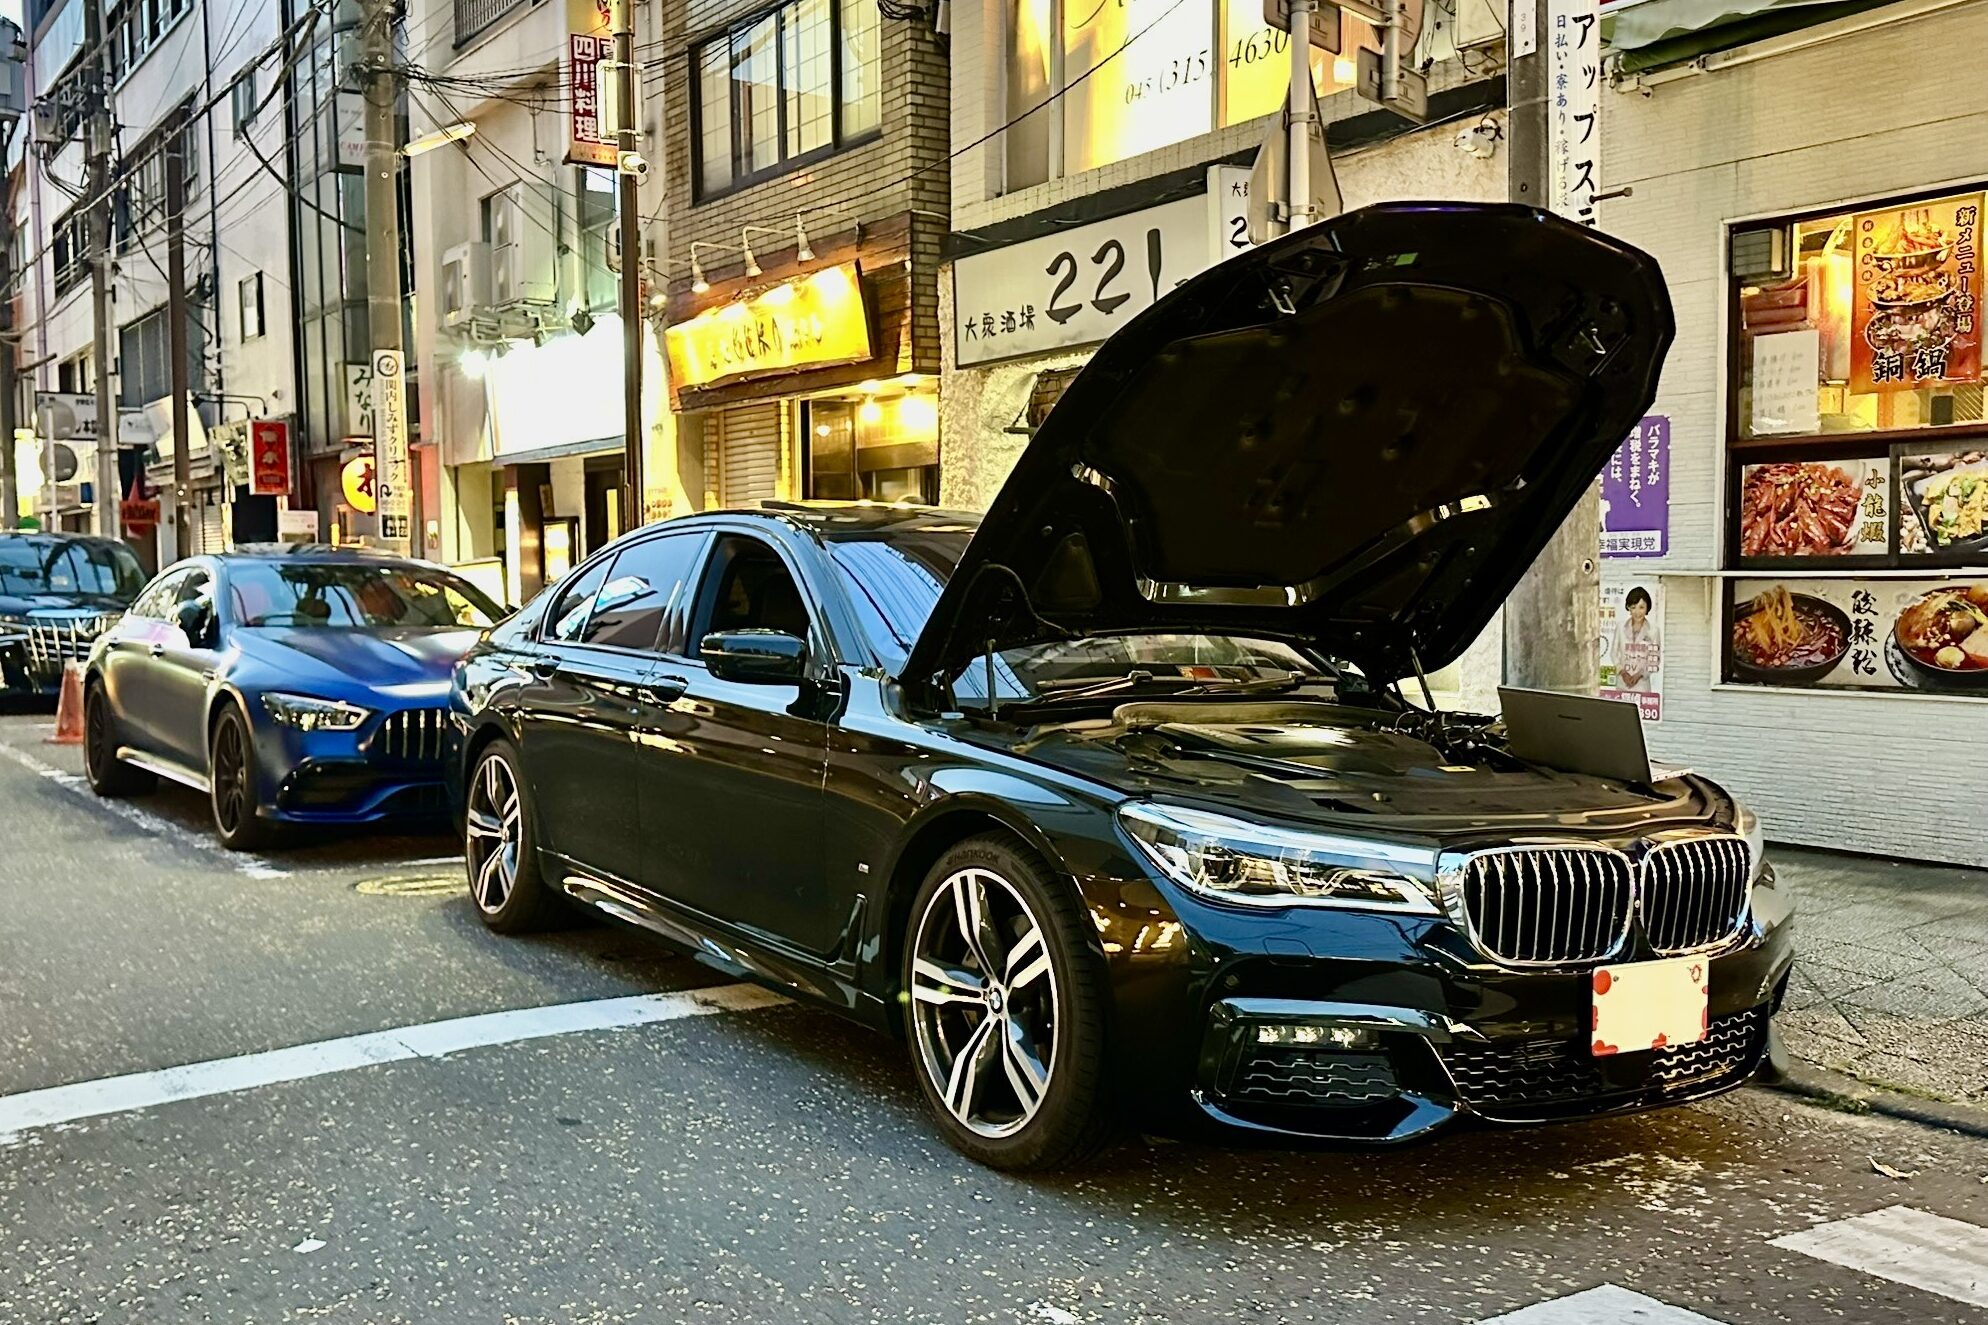 BMW G11 740e ECU tuning and bubbling installation (Fukutomi town trip)